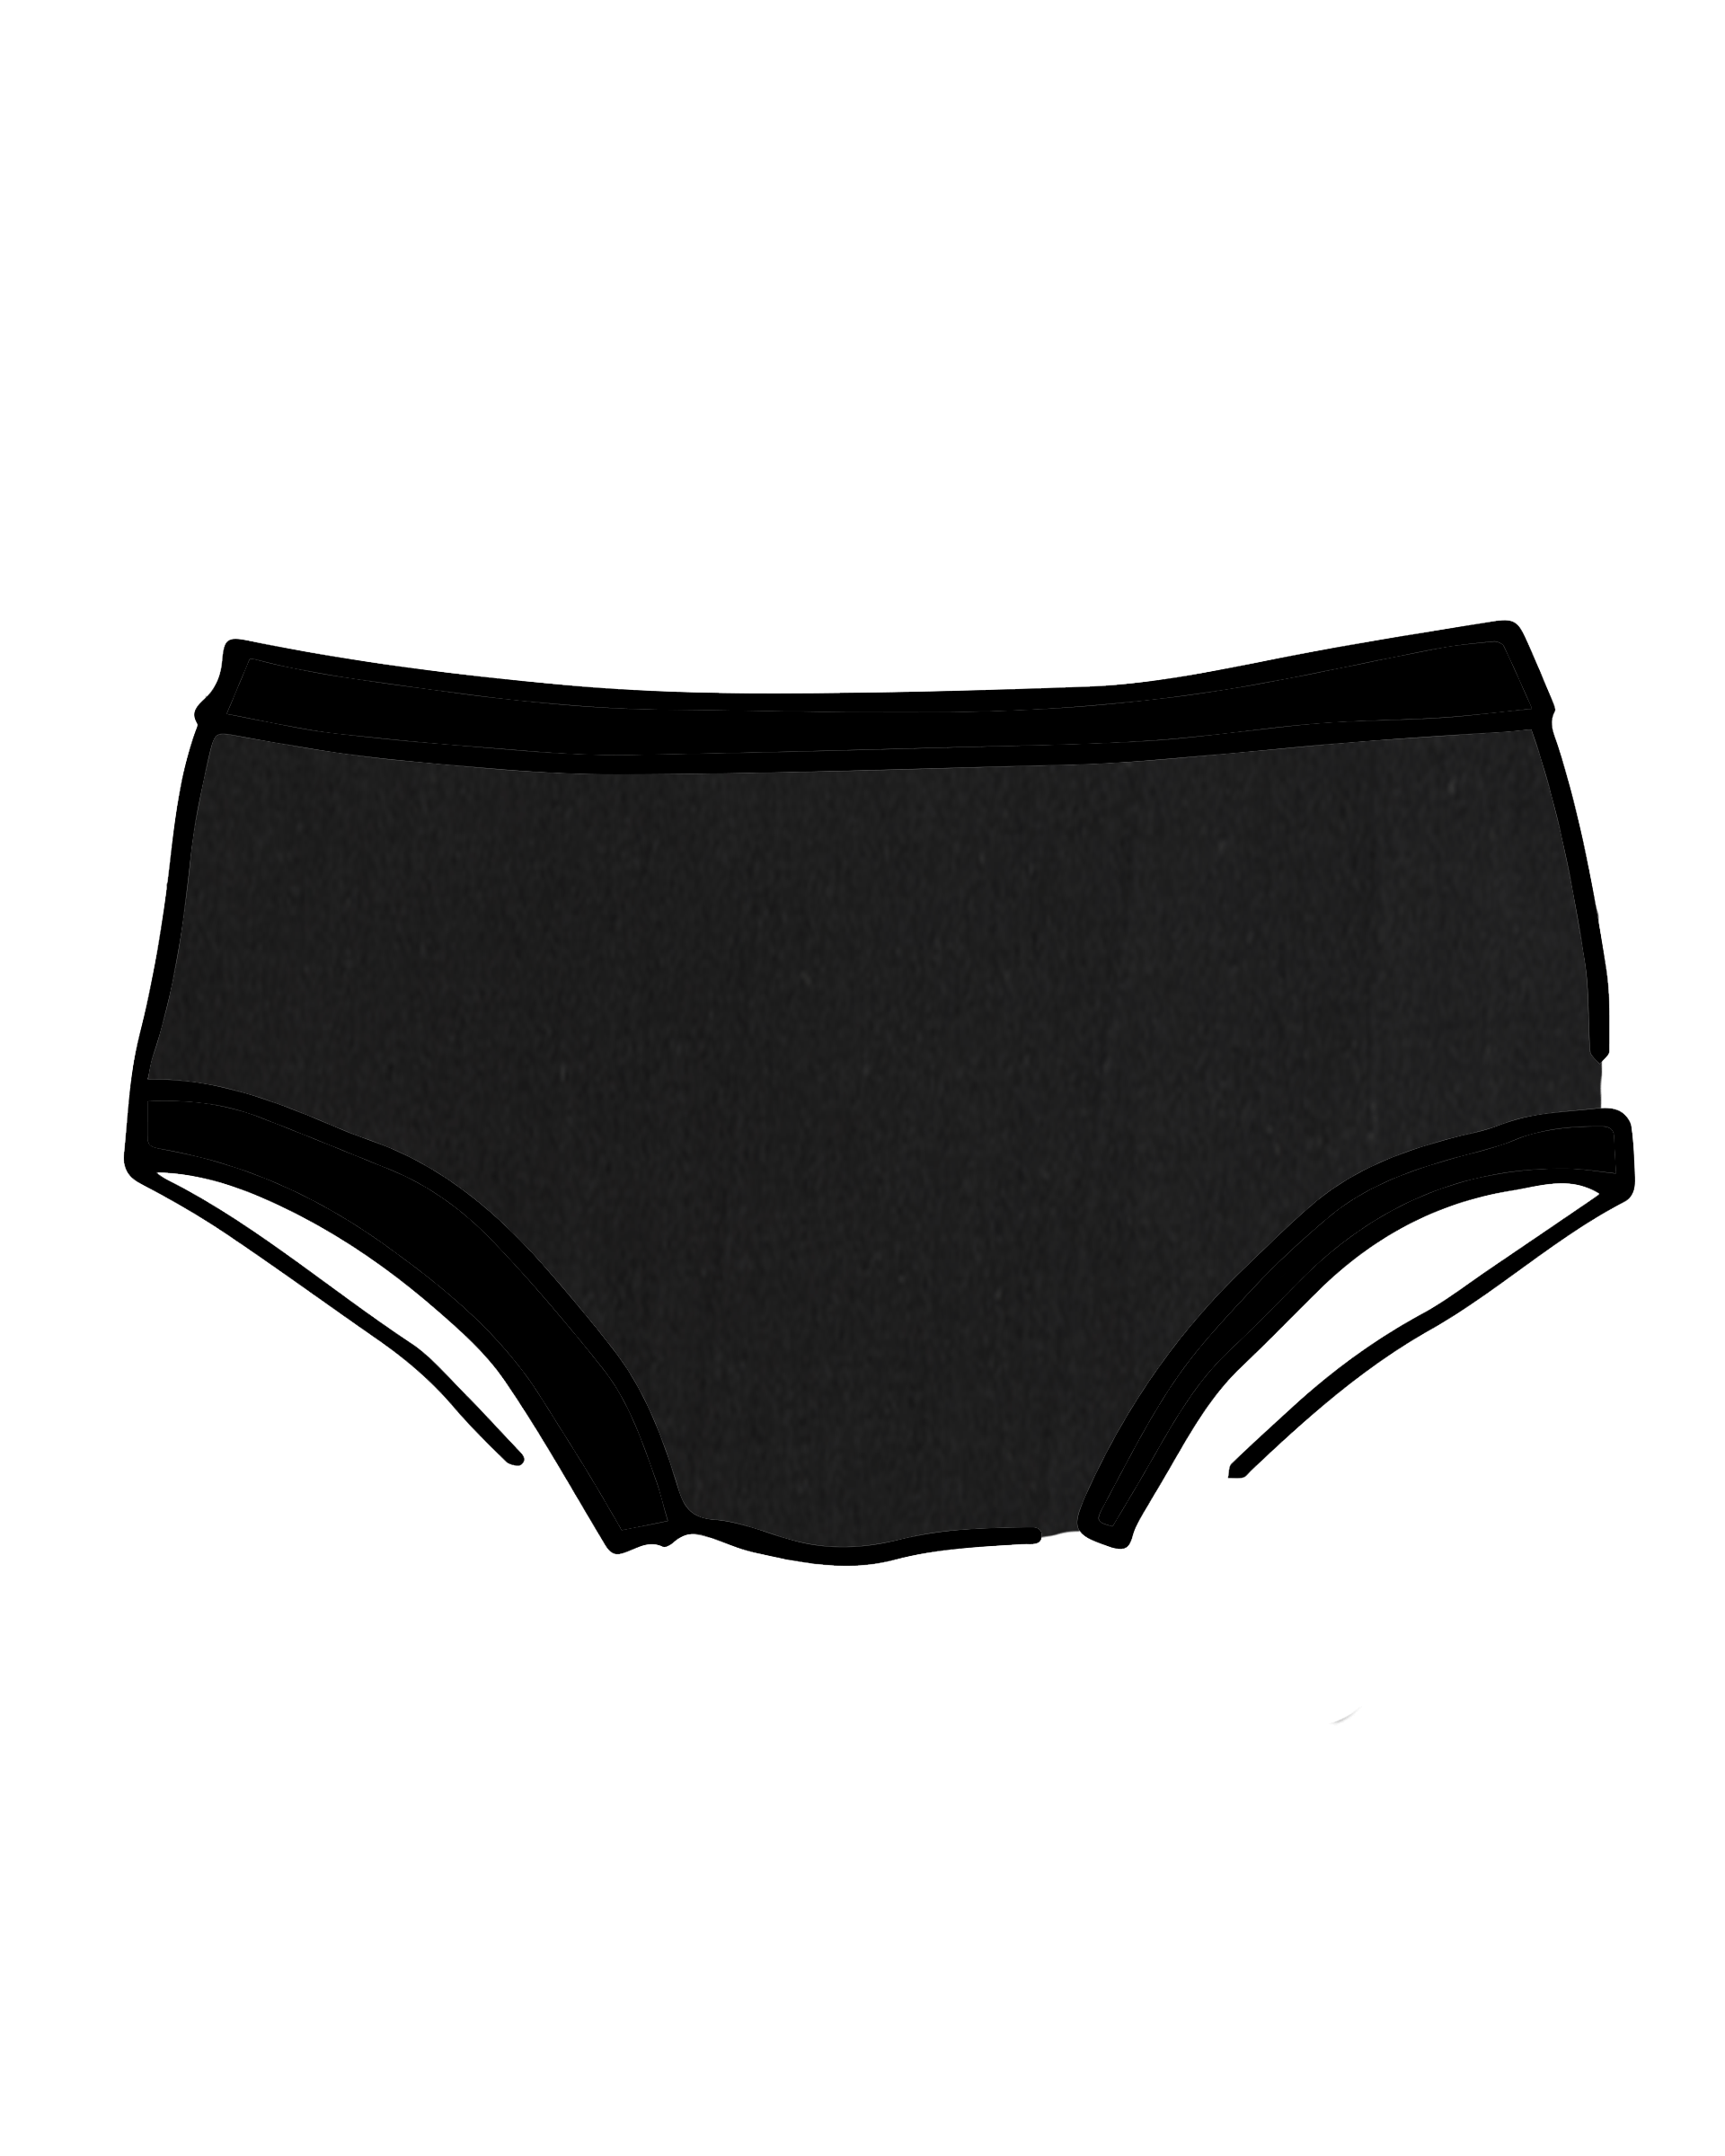 Drawing of Thunderpants Hipster style underwear in Plain Black.